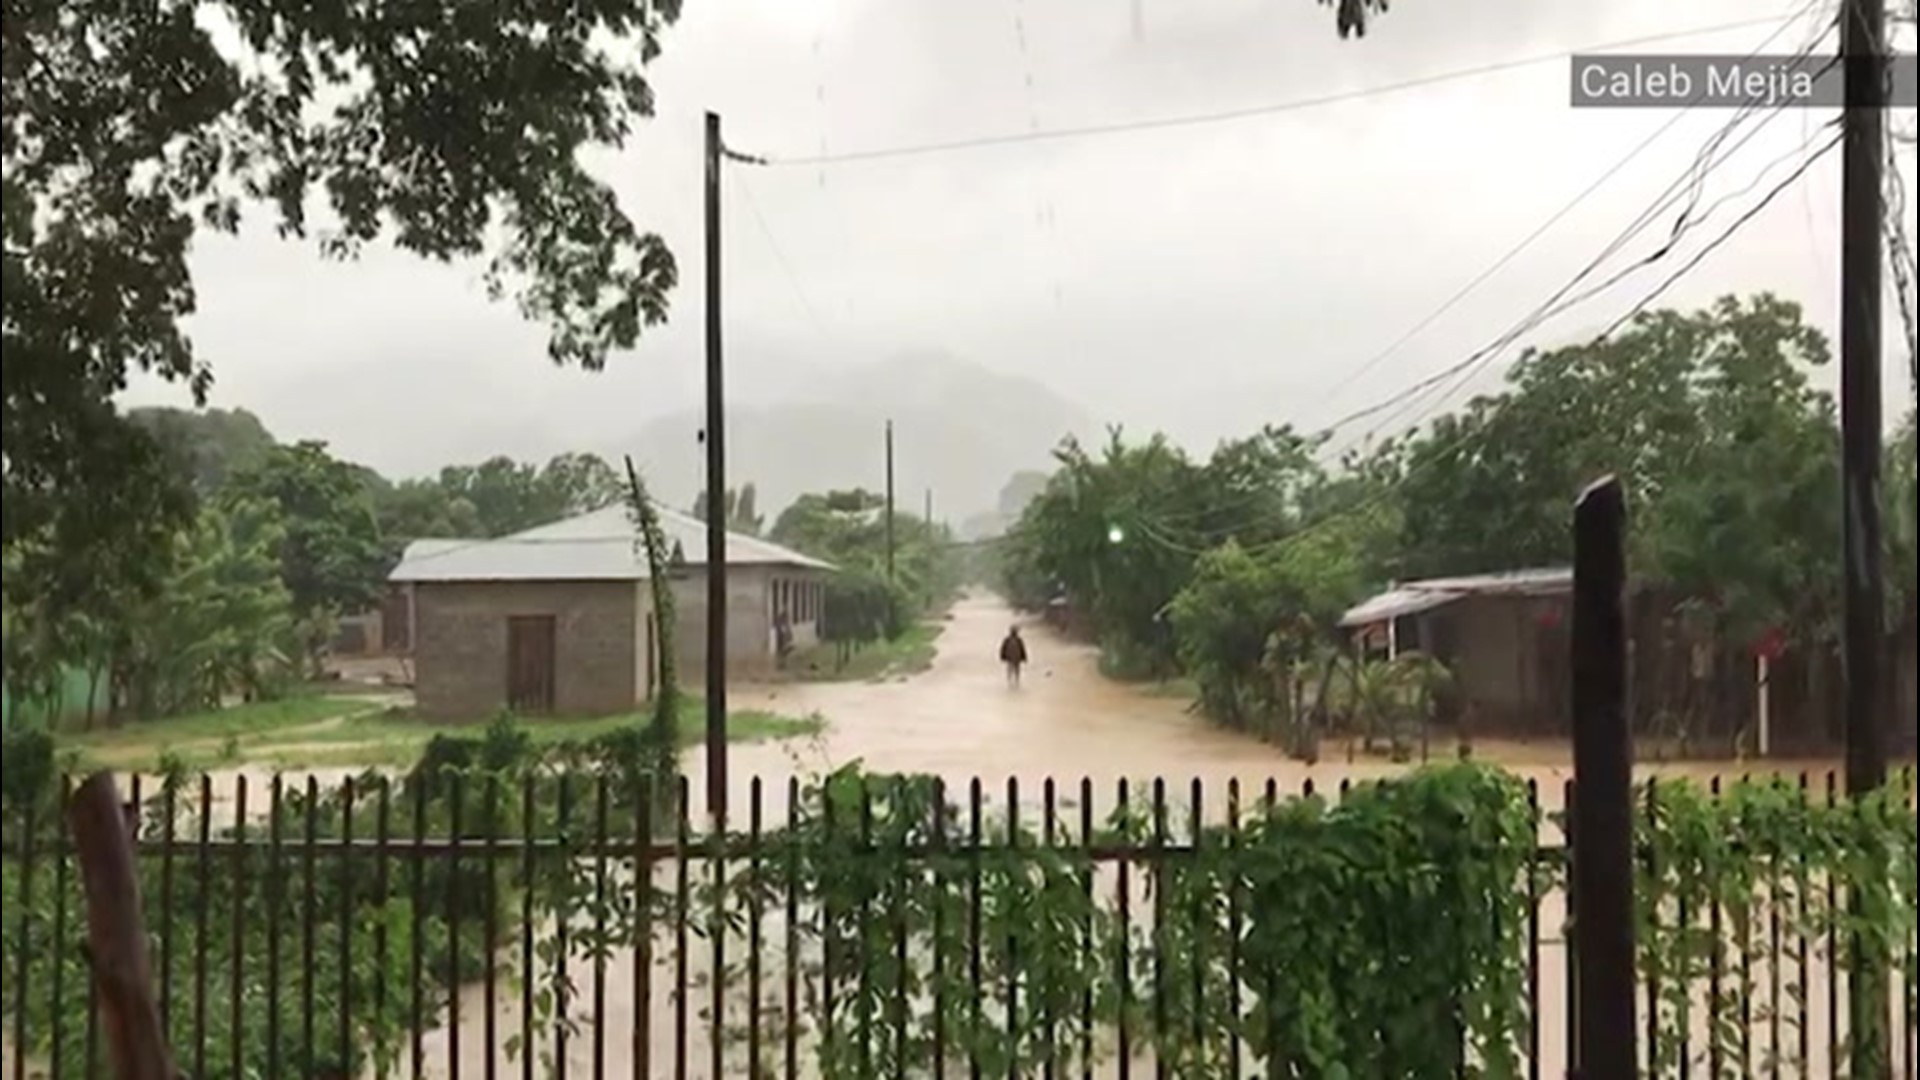 Disaster relief volunteers in Central America say some neighborhoods are still dealing with serious flooding, one week after Hurricane Iota hit the region.